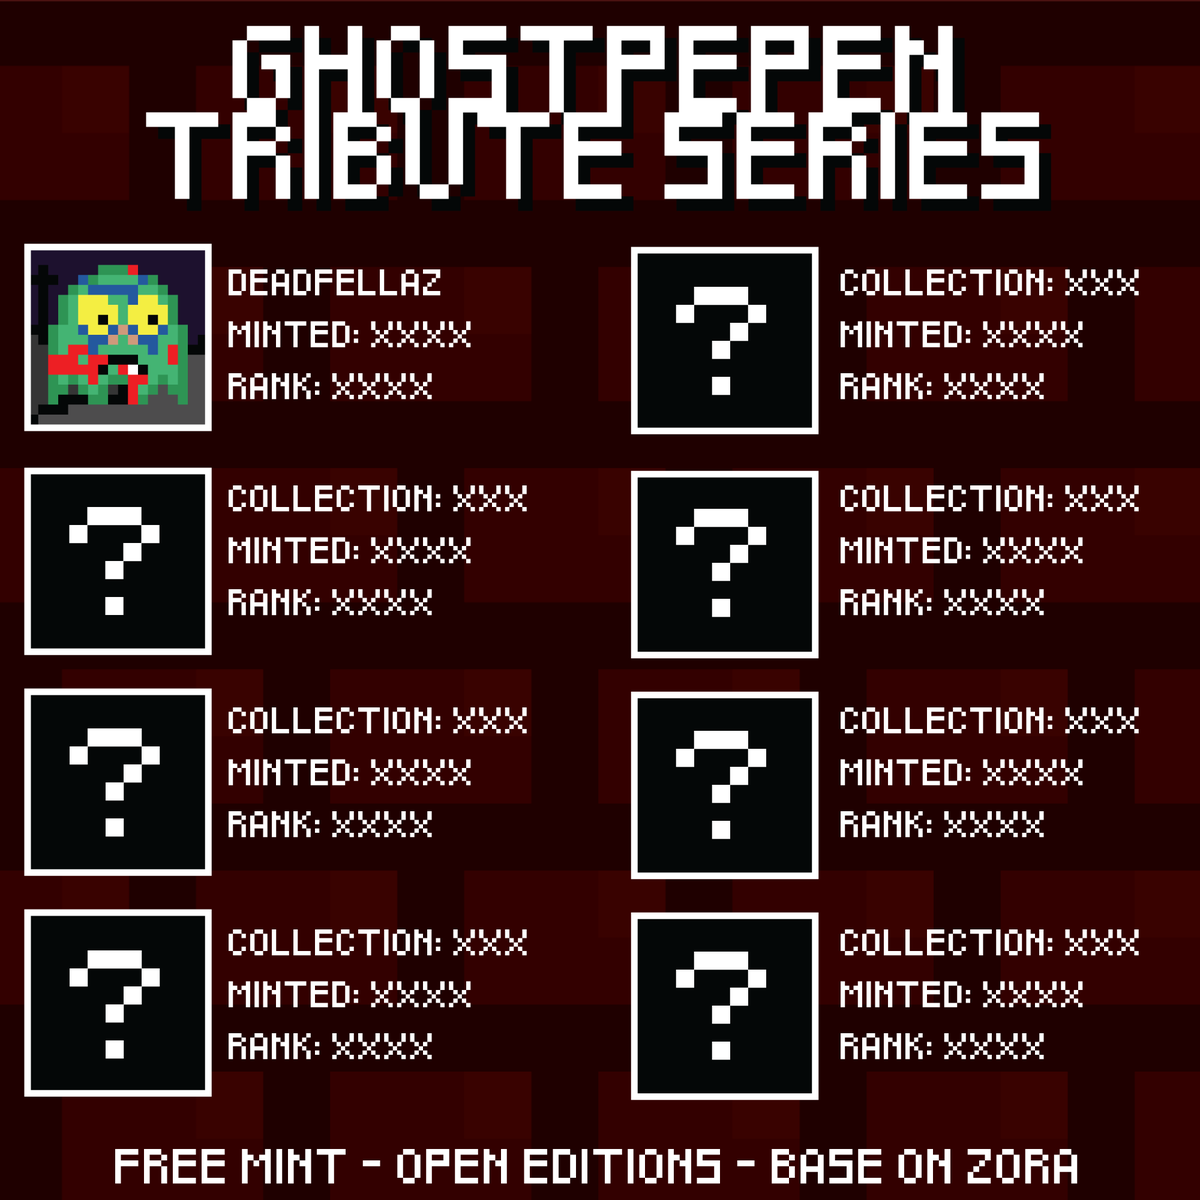 Ghostpepen Tribute: Deadfellaz
Only a couple of days left to grab your free Open Edition Deadfellaz Ghostpepen Tribute before it is closed forever and the next Tribute is released into the world.
Mint link below 👇